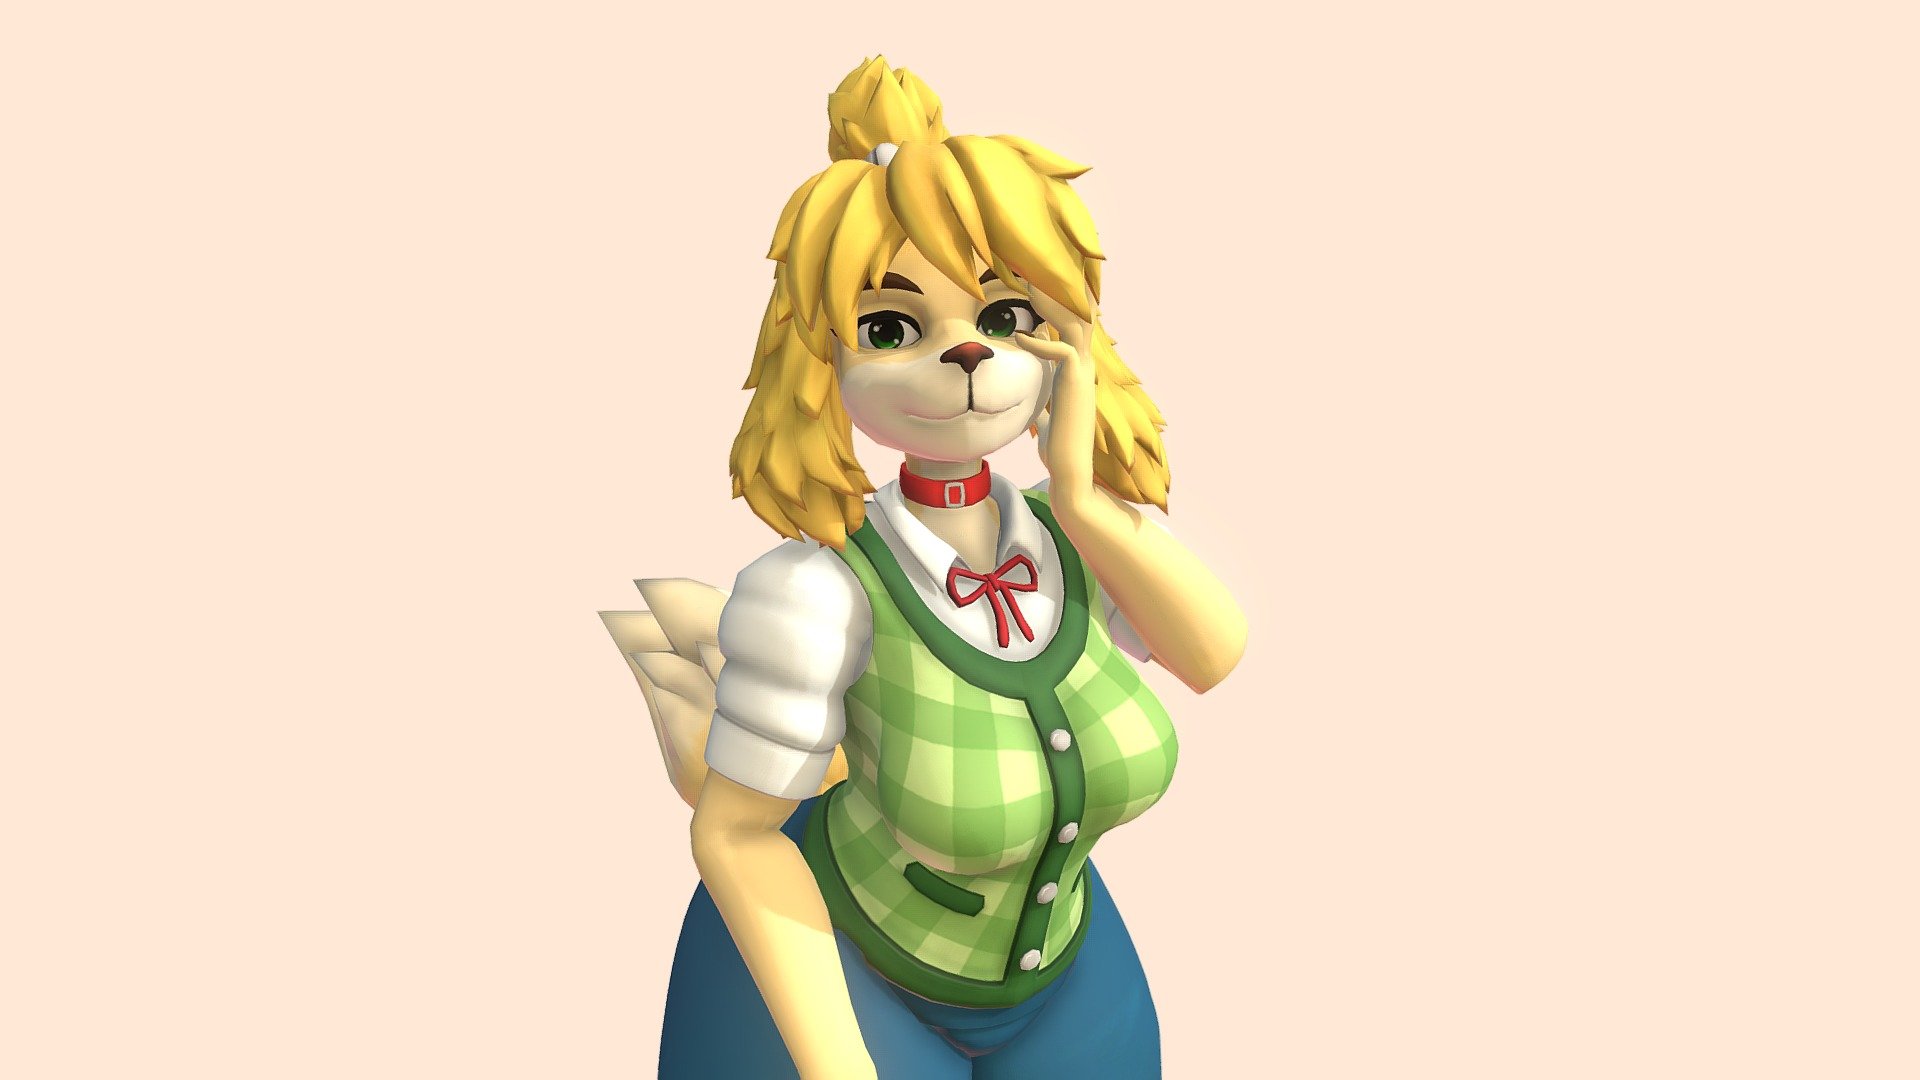 Isabelle animal crossing - VRChat - 3D model by Teiozemo (@Teiozemo)  [d7ead46]